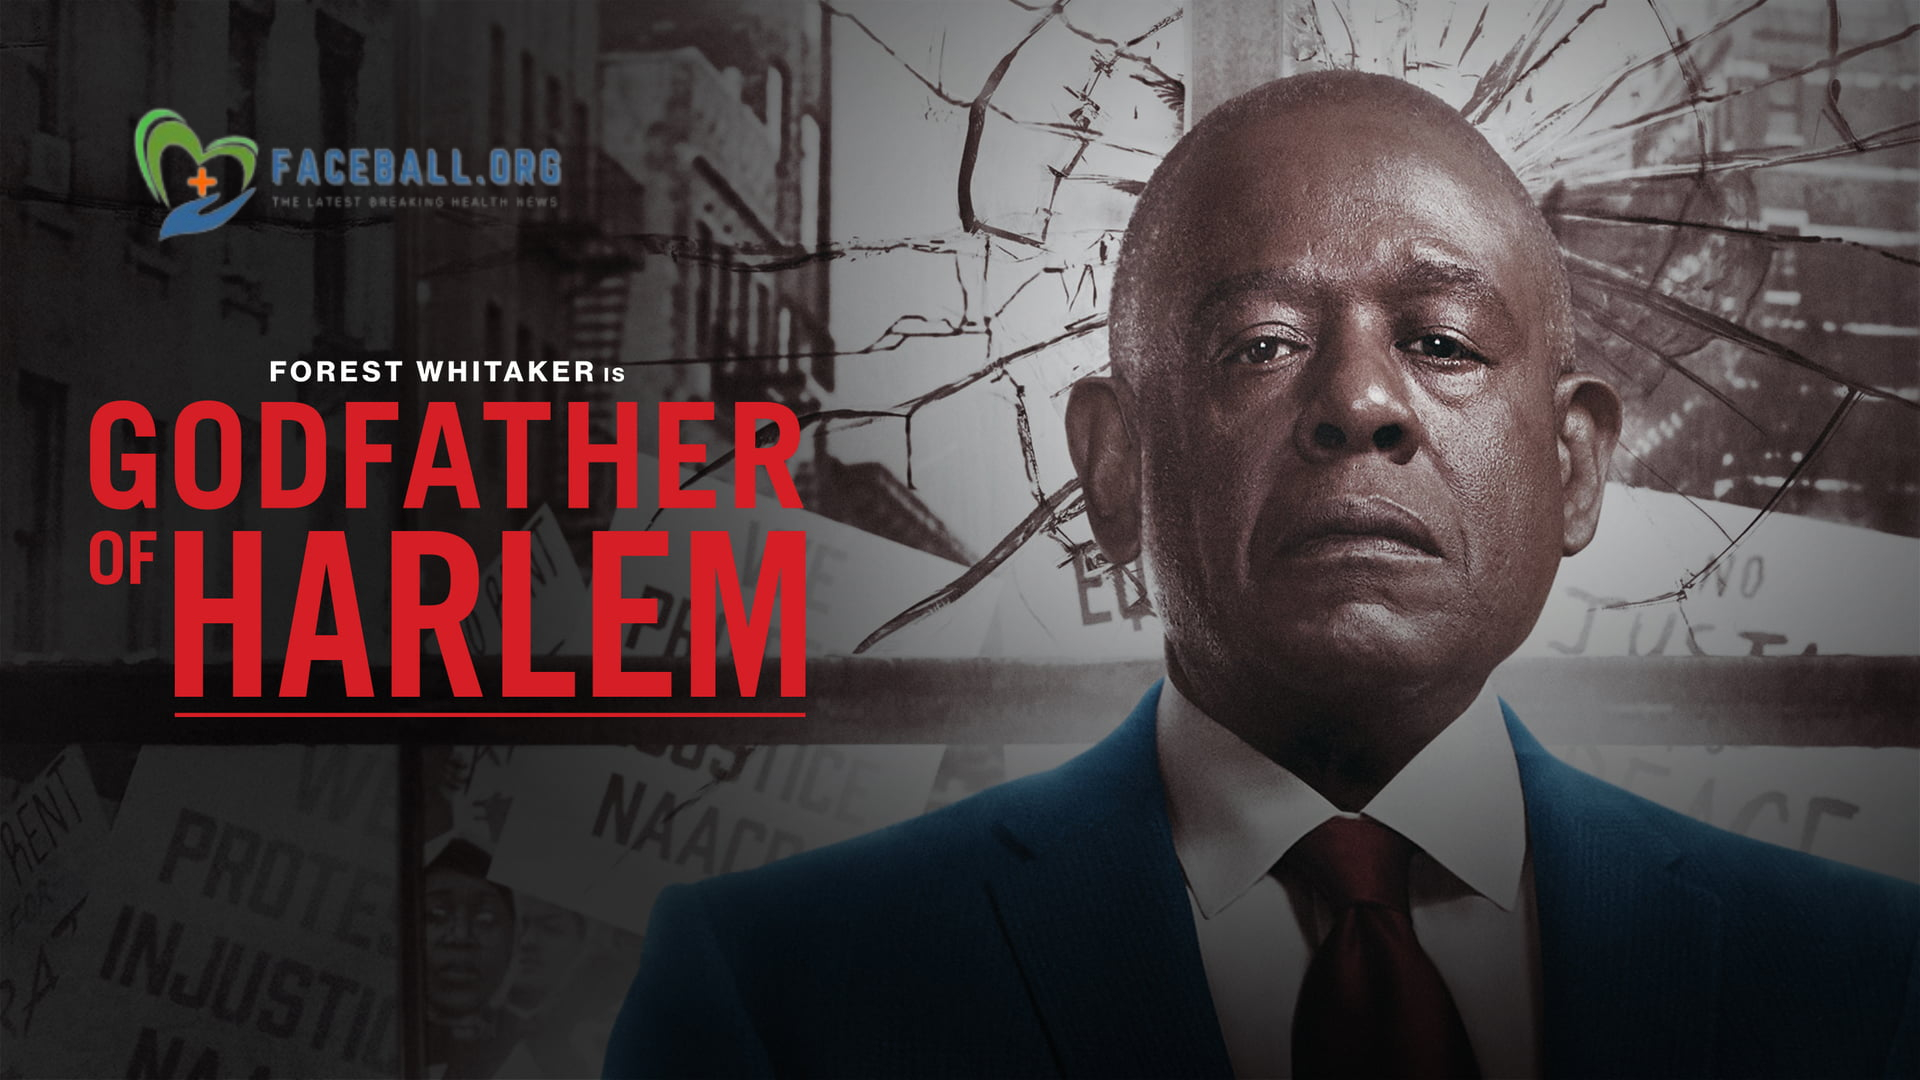 Godfather of Harlem Season 3: When Will Be Come? News that Goes Viral!